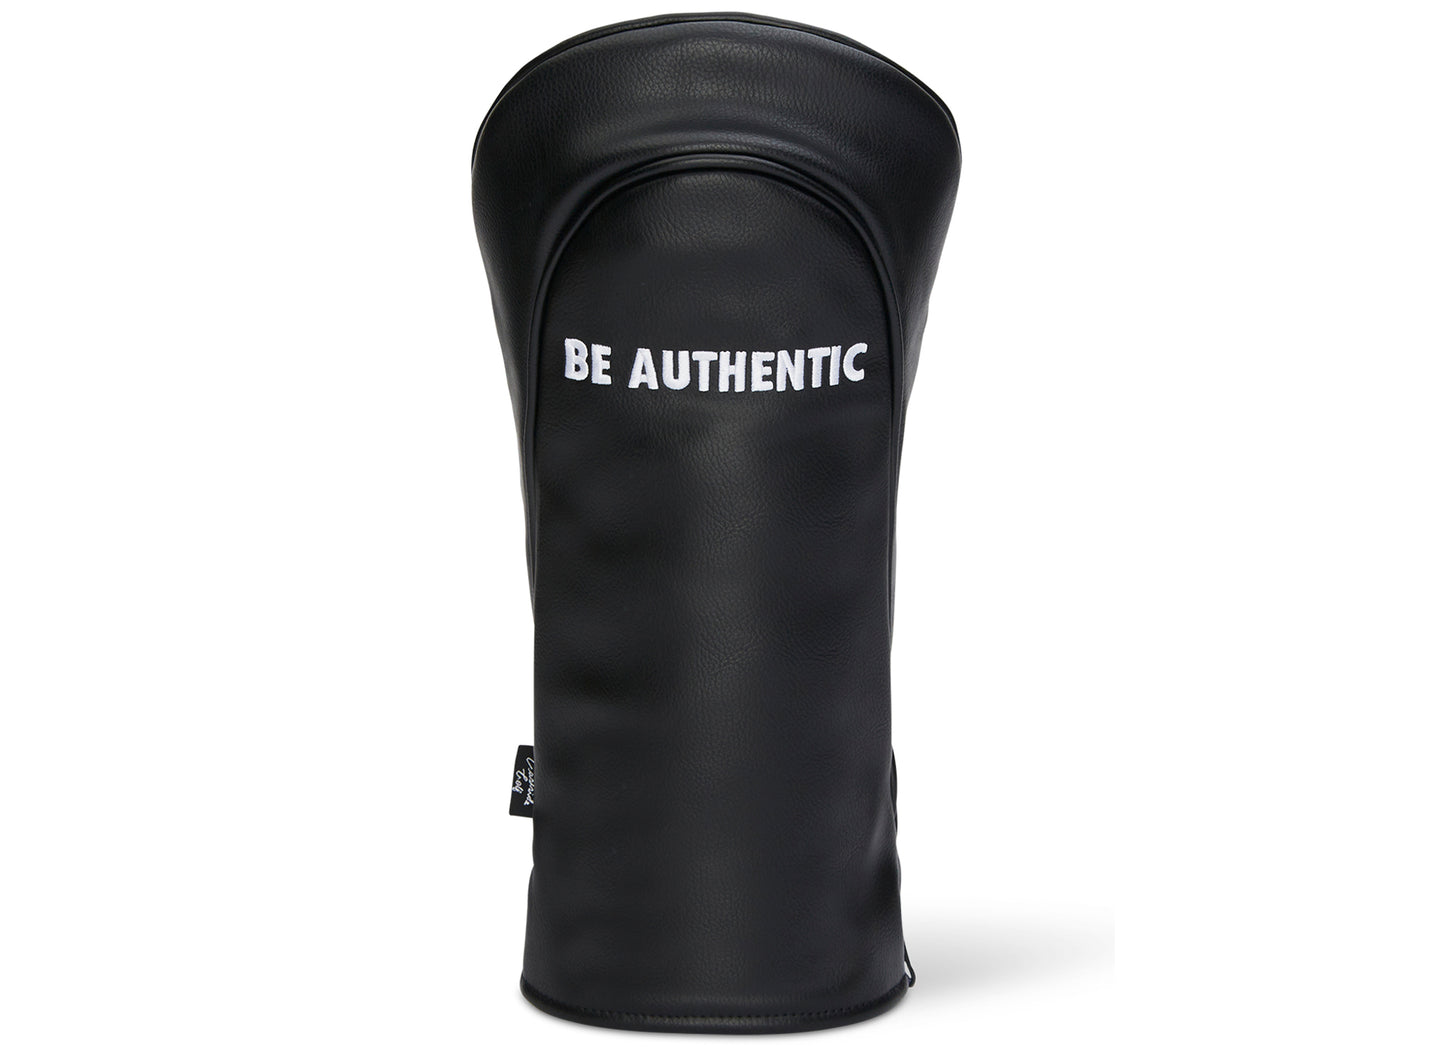 Eastside Golf 'Be Authentic' Driver Headcover